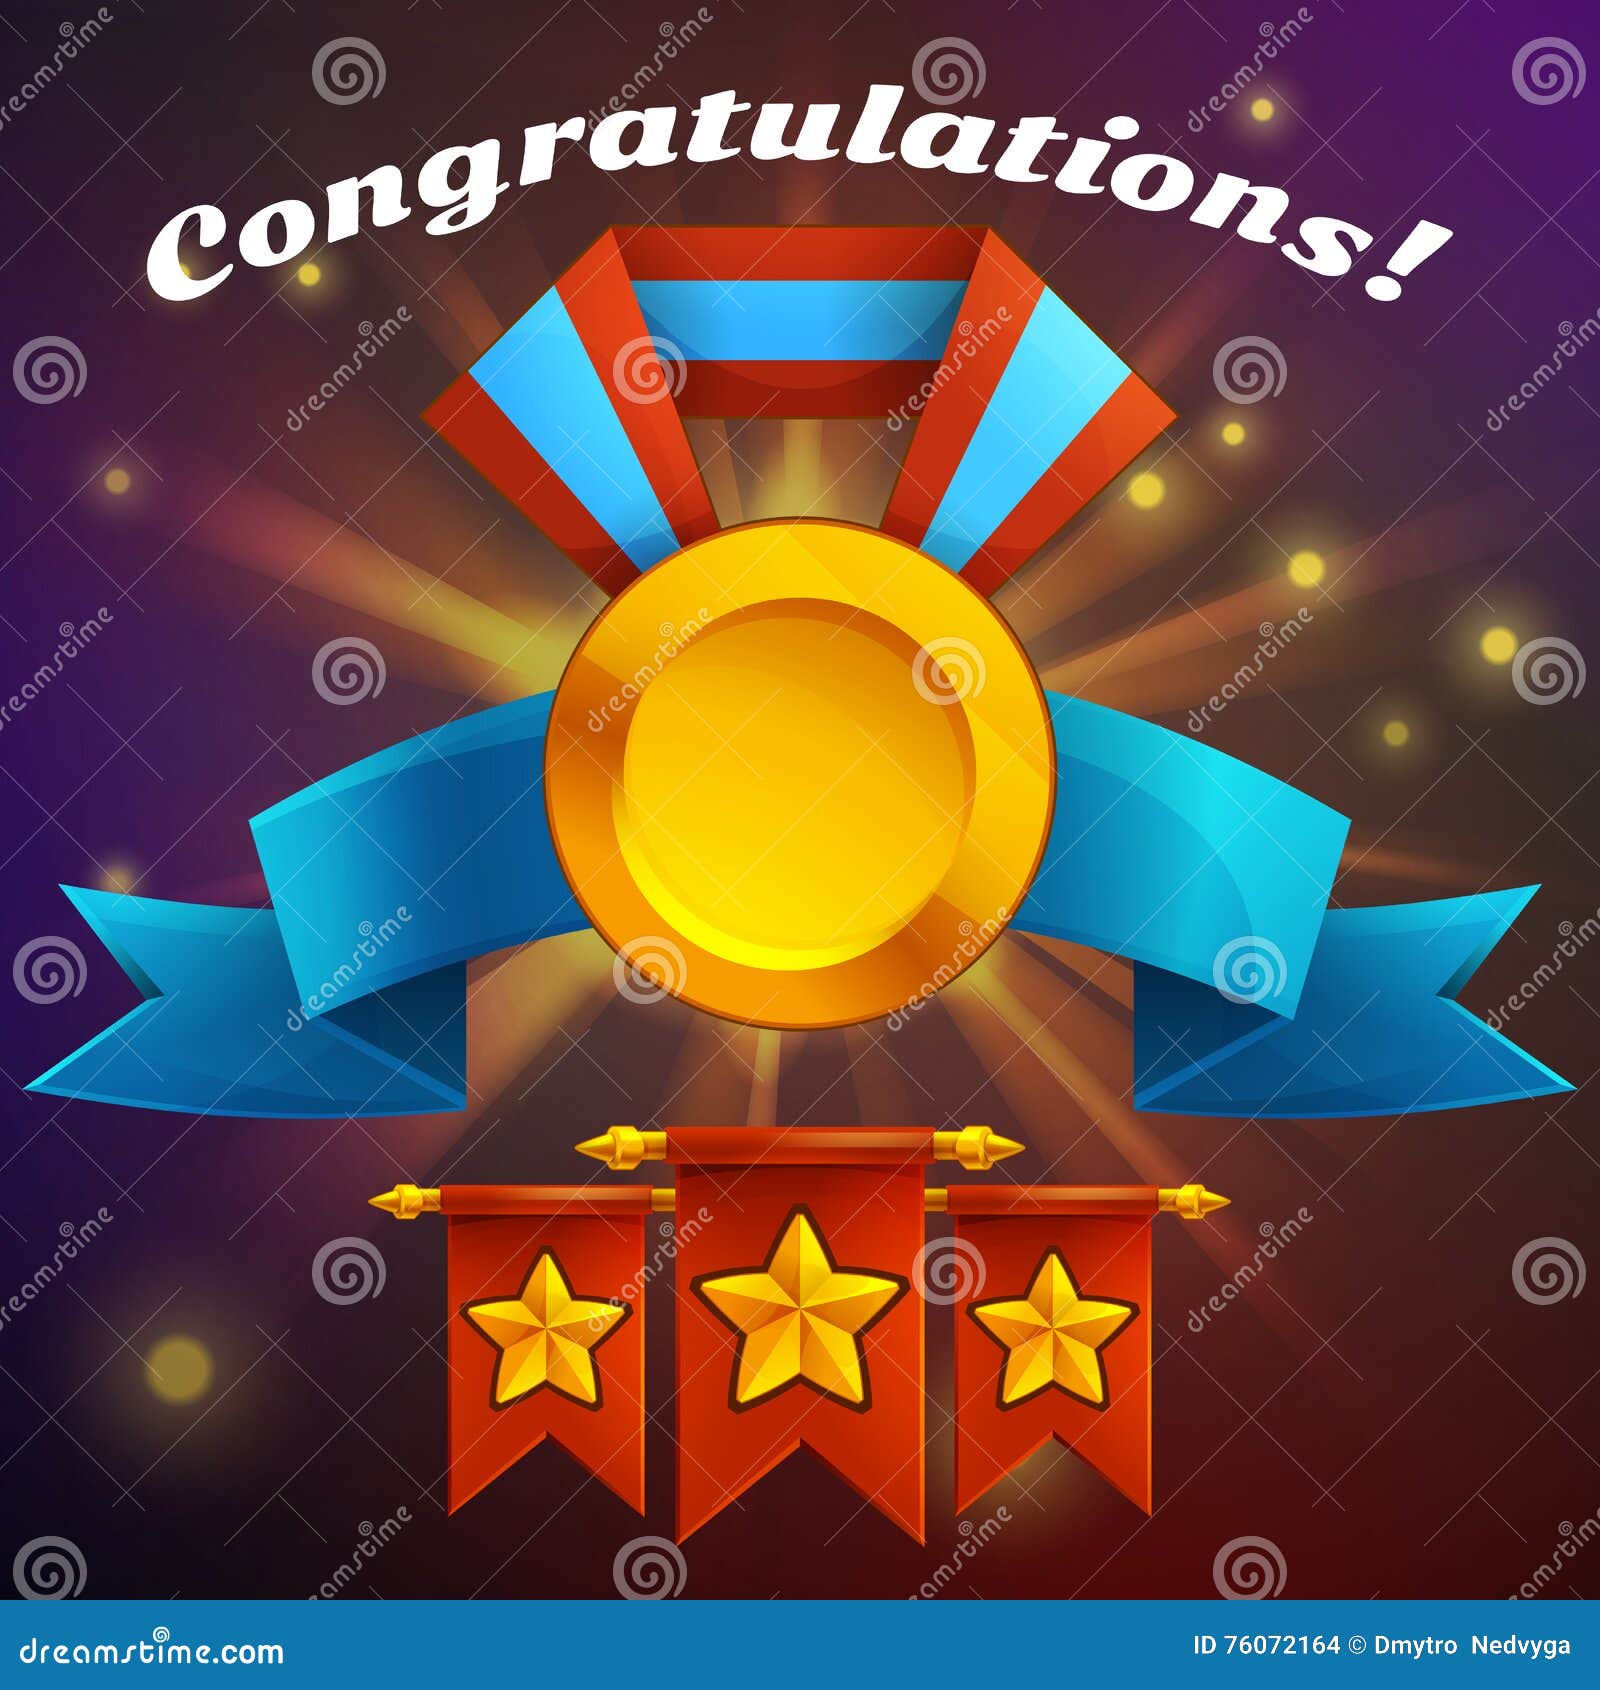 Receiving the Cartoon Achievement Game Screen. Vector Illustration with  Golden Medal. Stock Vector - Illustration of achievement, element: 76072164